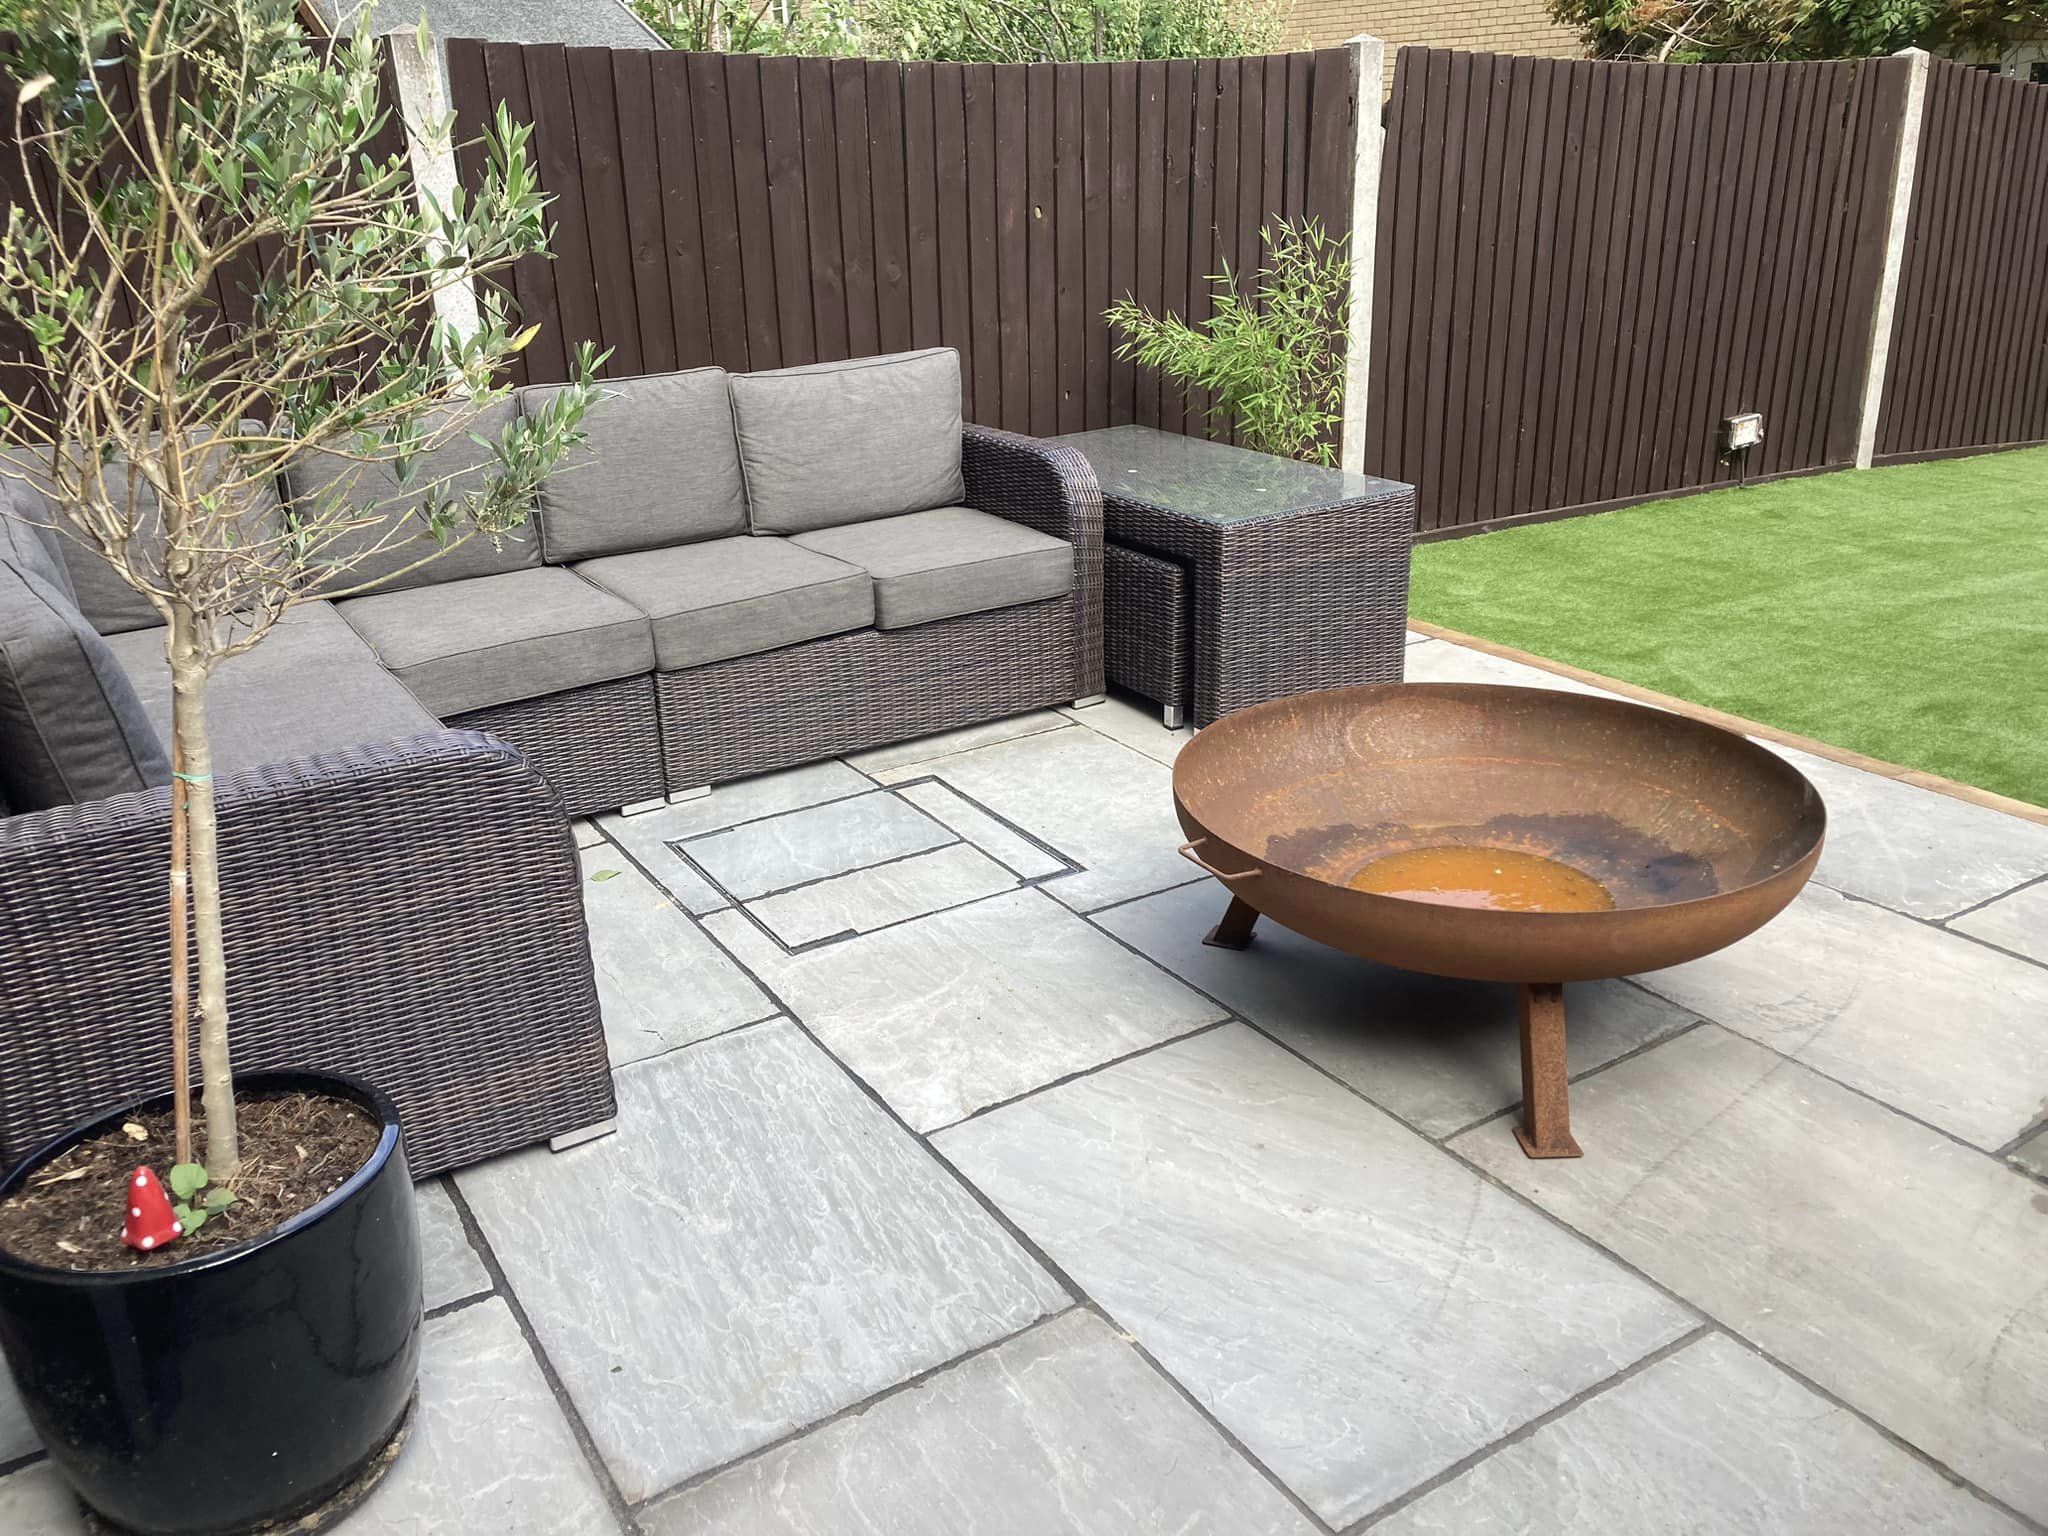 Choosing Natural Stone for Your Patio: Pros and Cons